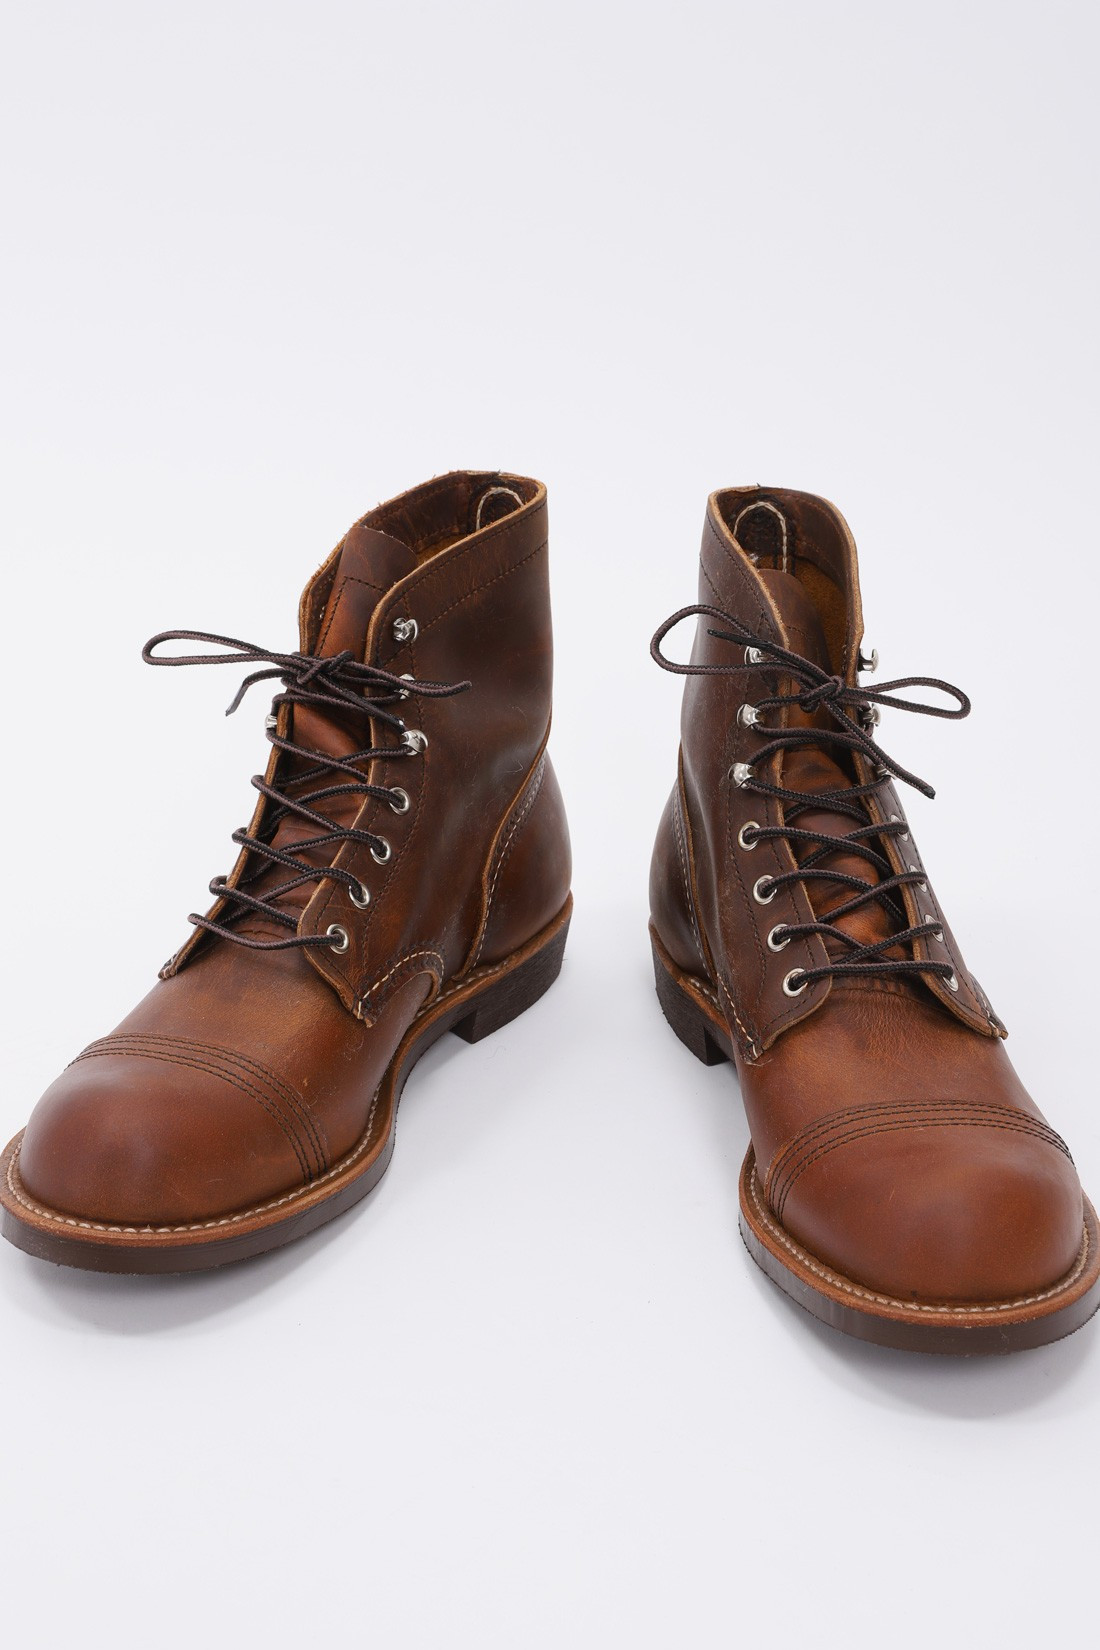 RED WING / Iron ranger style n0.08085 Copper